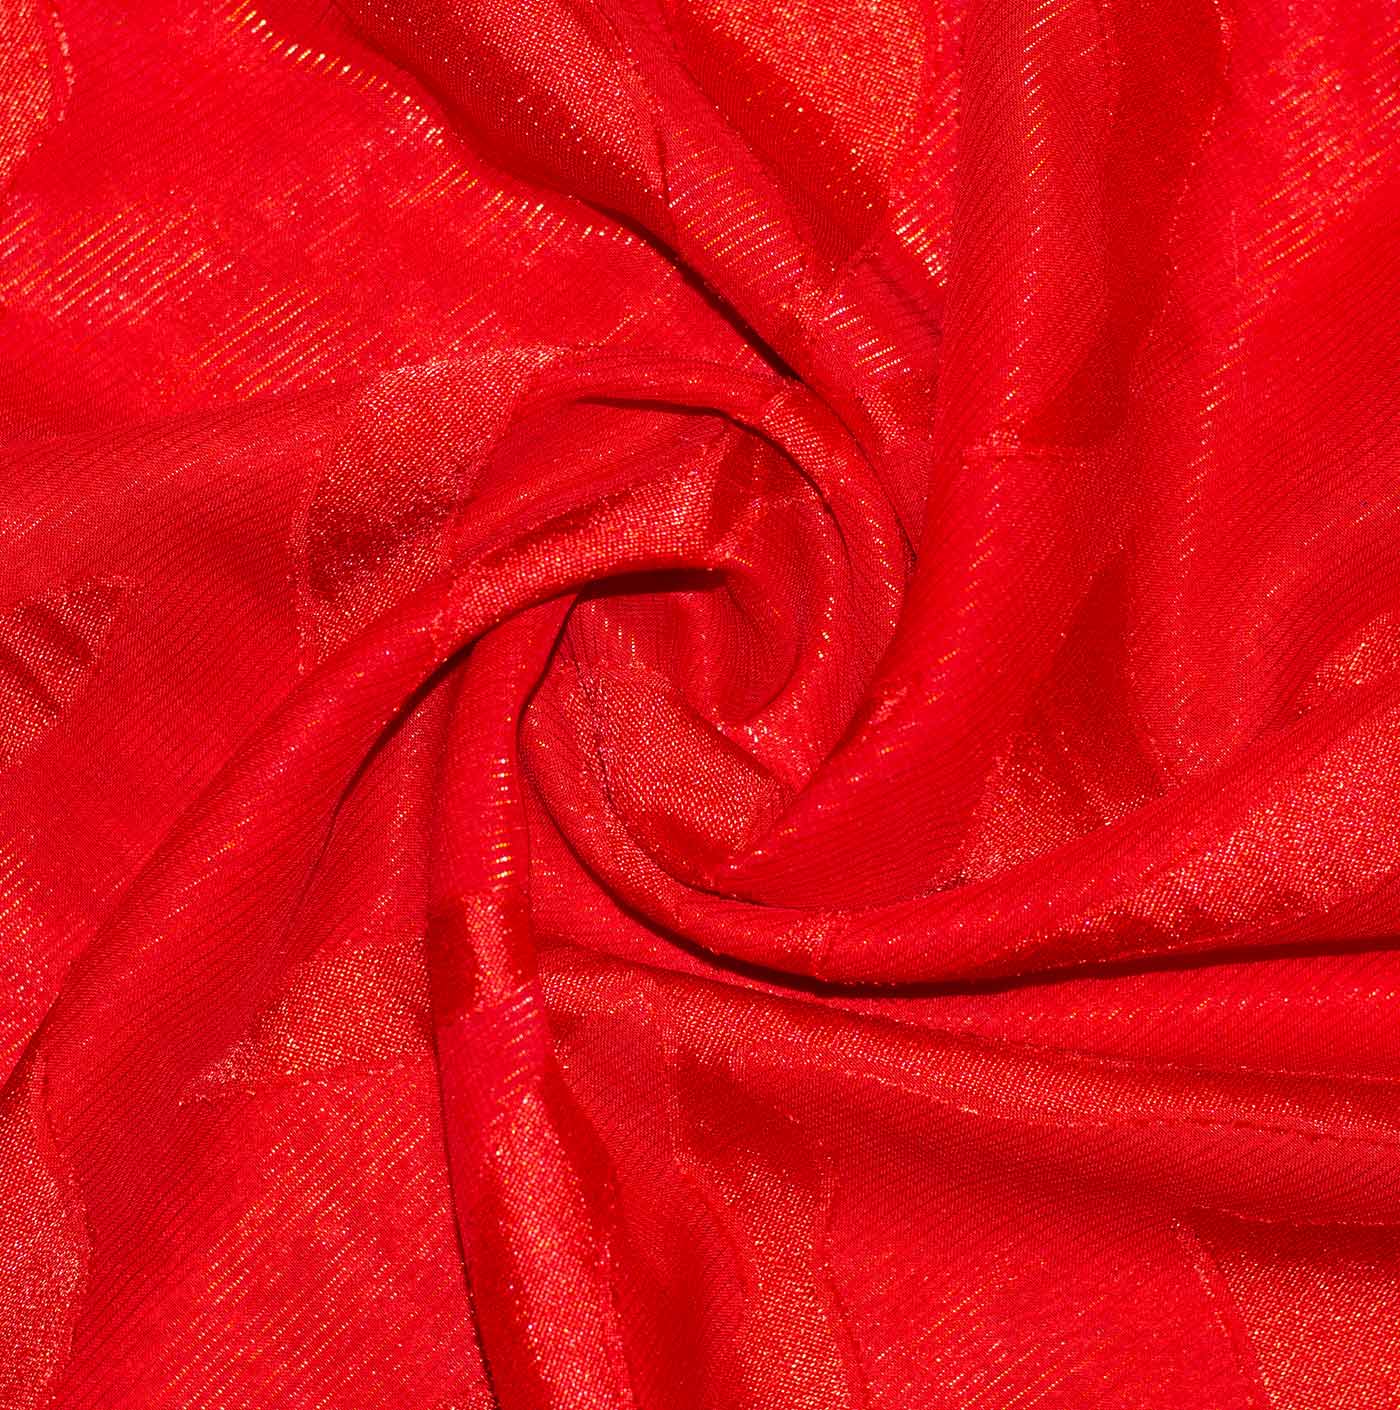 Red Abstract Design Chiffon Fabric